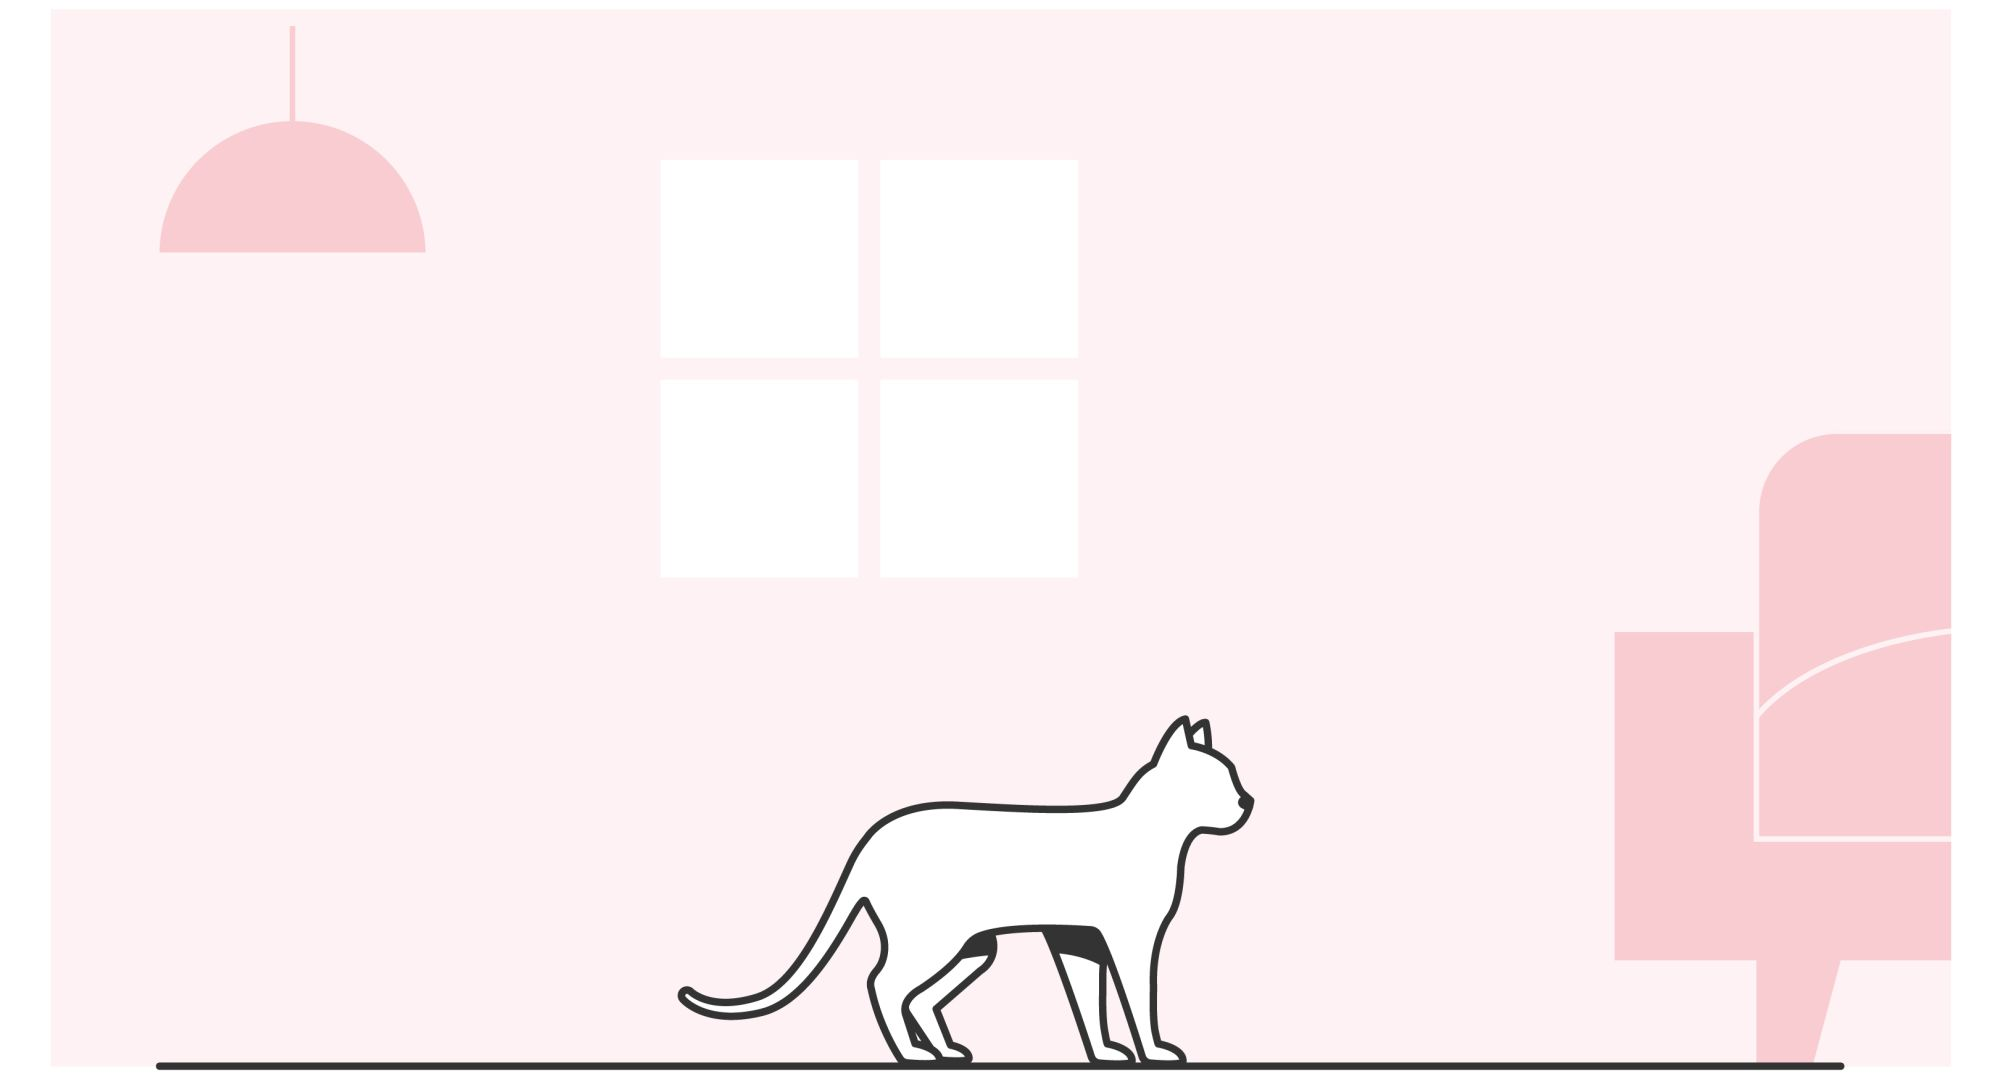 Illustration of a cat in a house